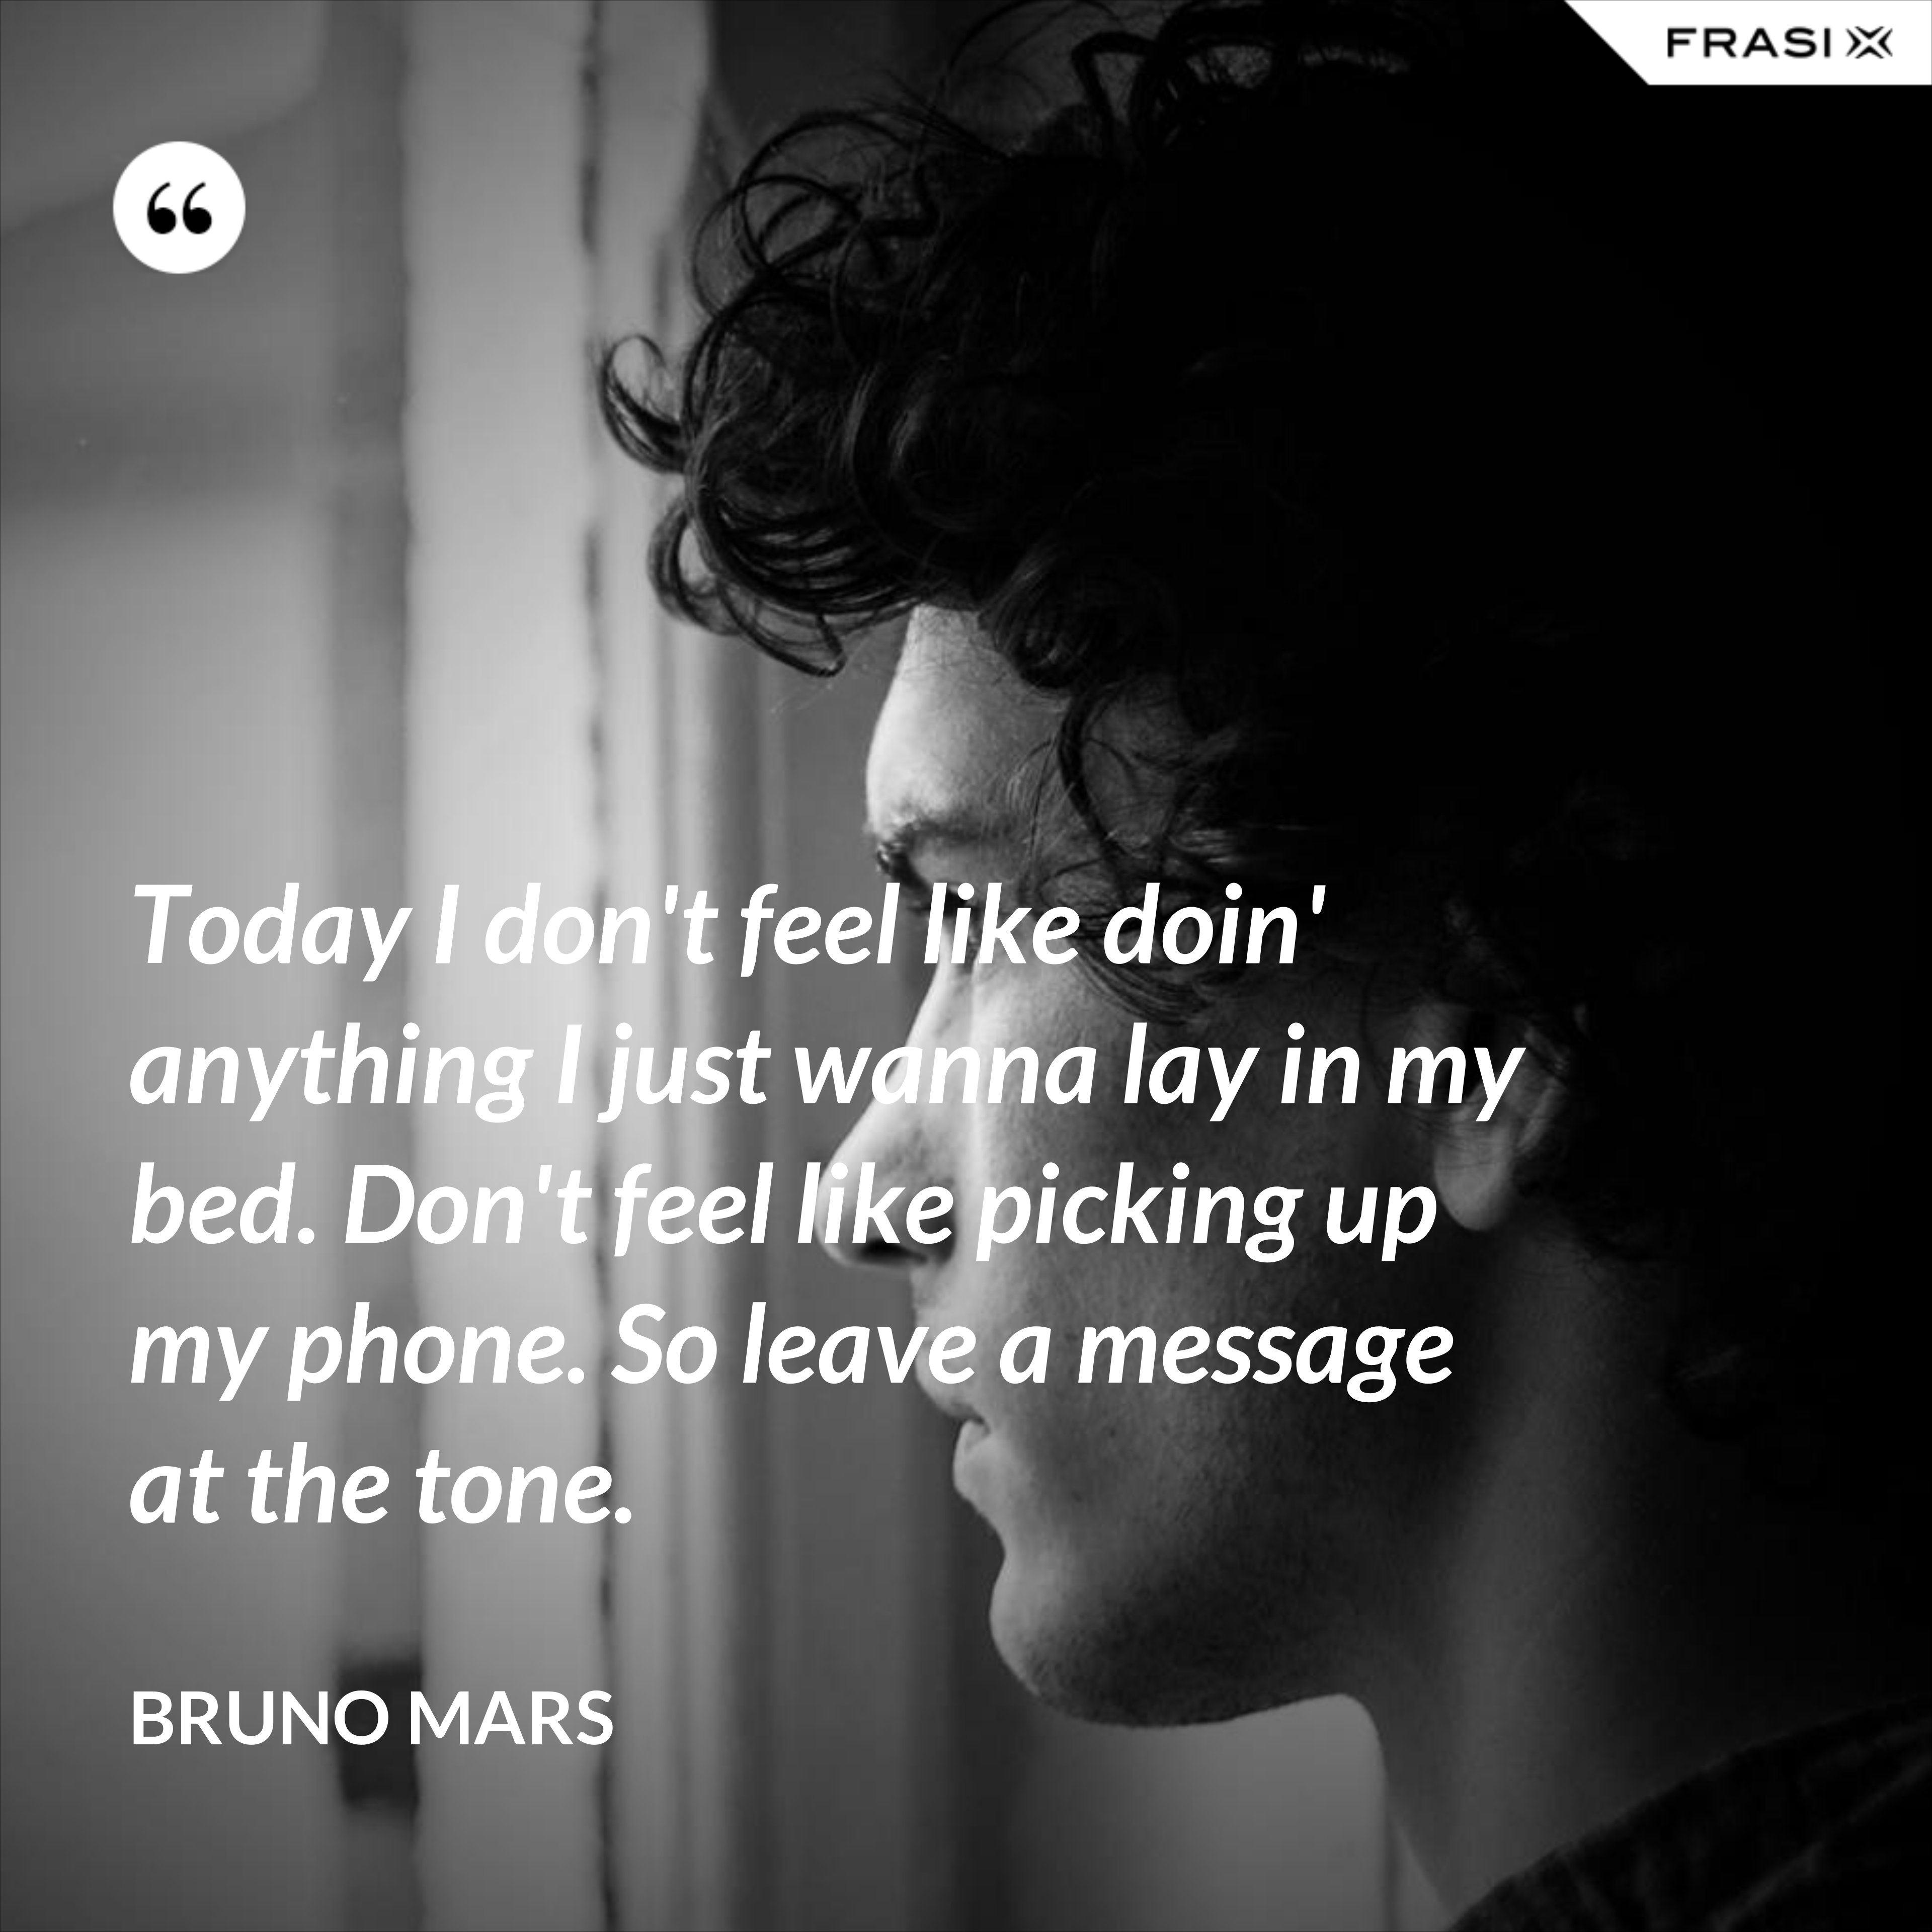 Today I don't feel like doin' anything I just wanna lay in my bed. Don't feel like picking up my phone. So leave a message at the tone. - Bruno Mars